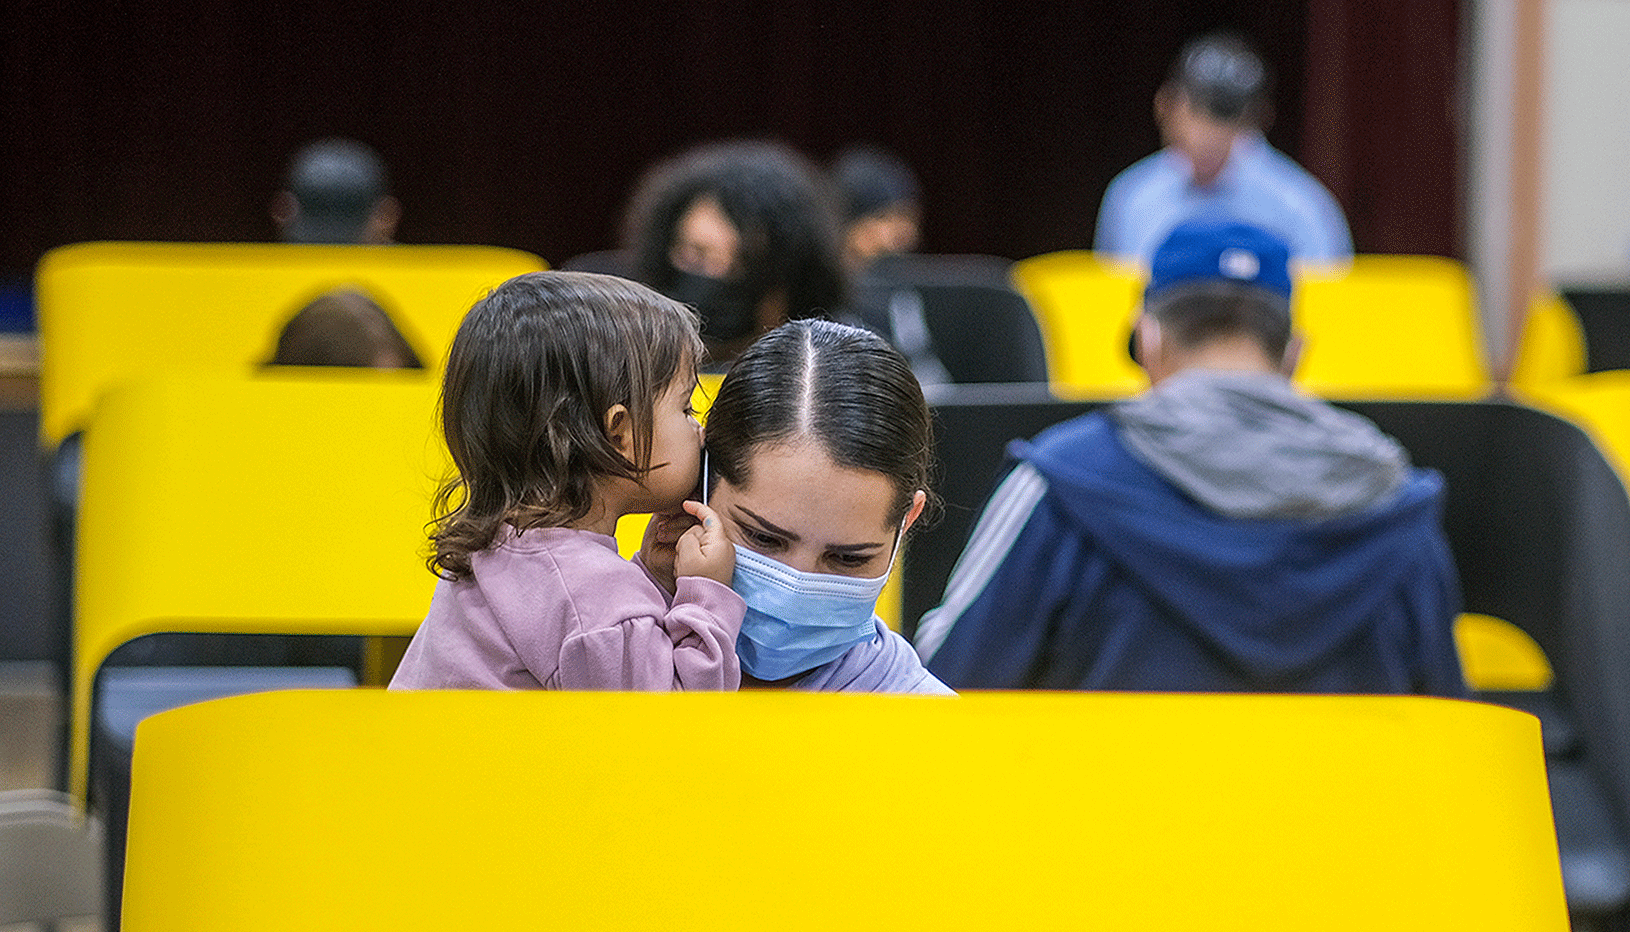 People voting at a yellow booth holding a child